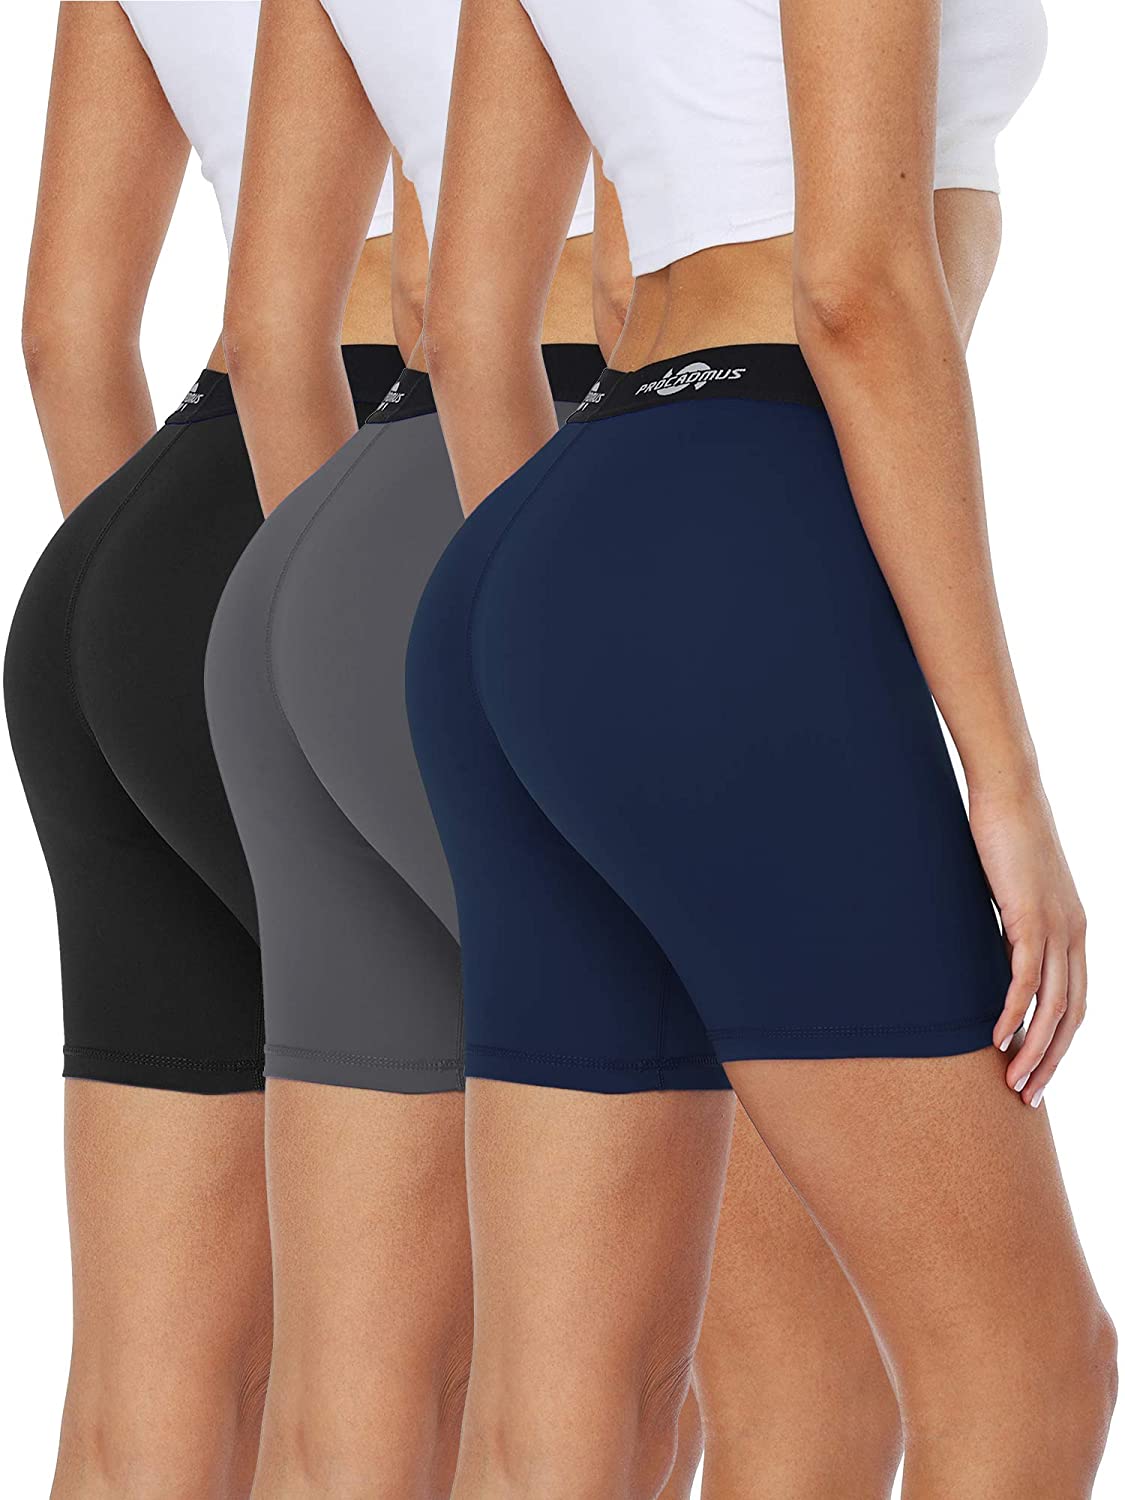 6" INSEAM NWOT VOLLEYBALL EXERCISE COMPRESSION SHORTS SOLID COLORS WOMENS 3",4" 